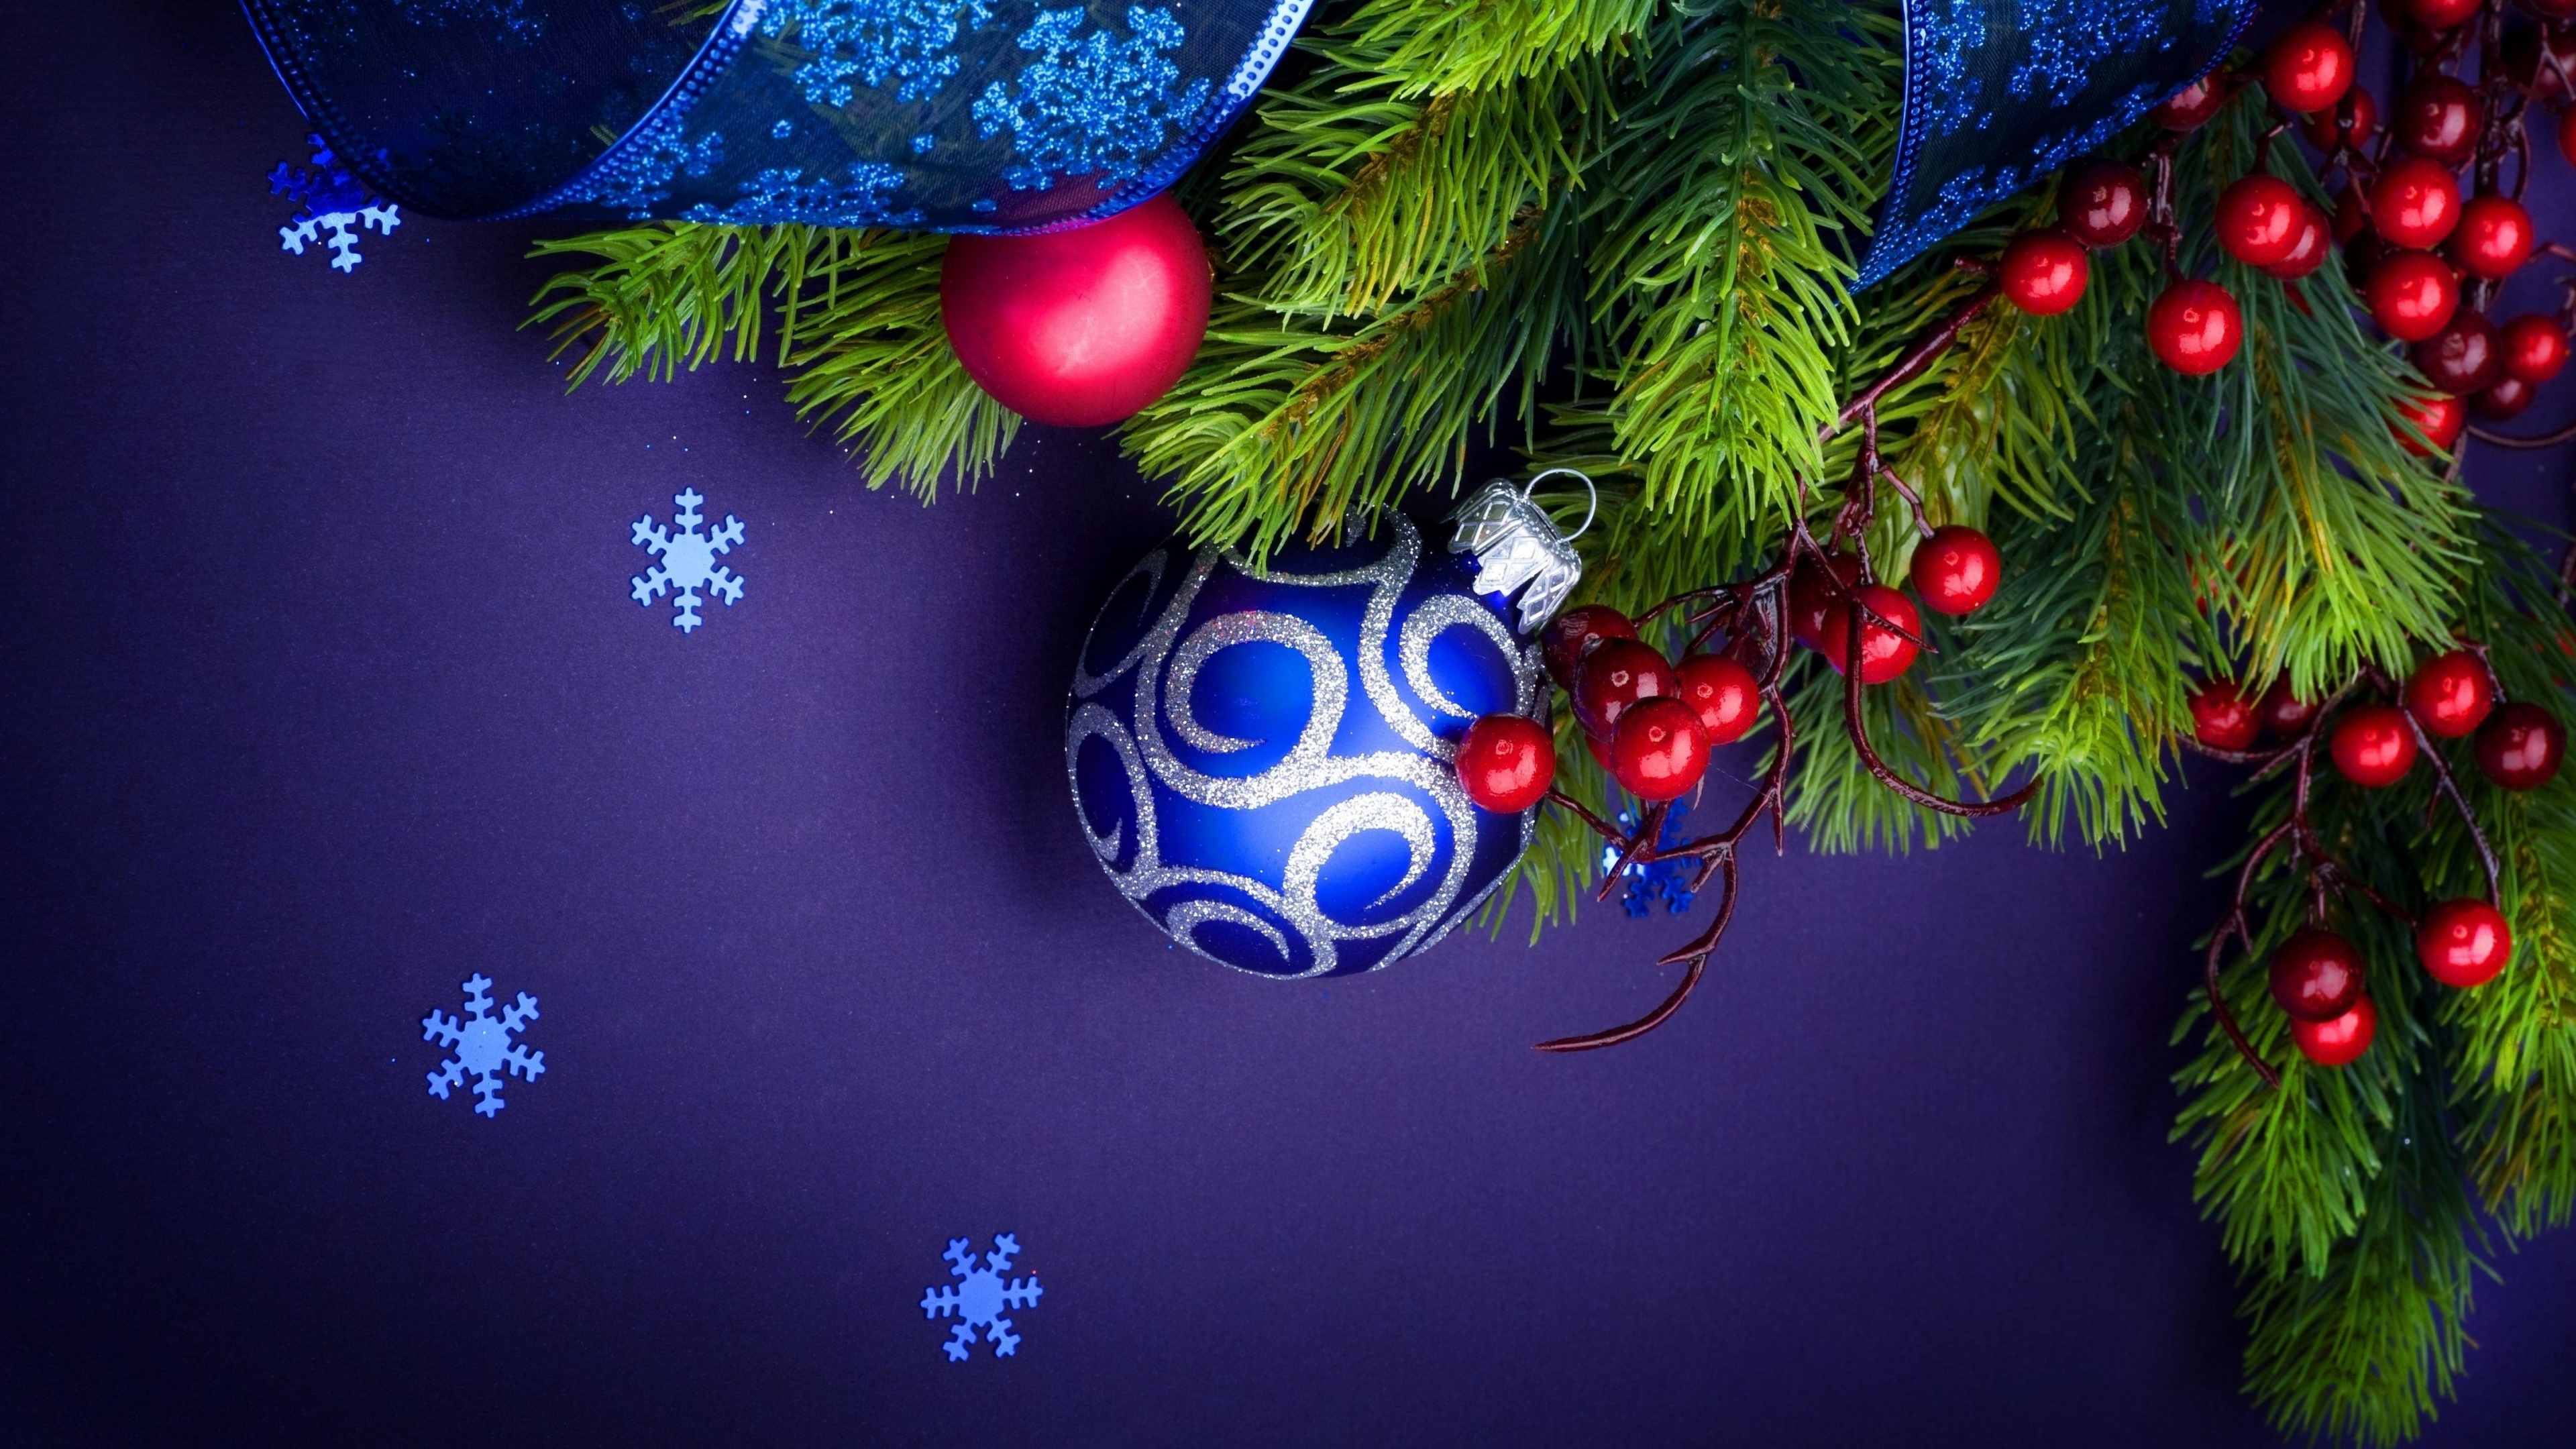 54 Collection Christmas wallpaper hd 4k for wallpaper